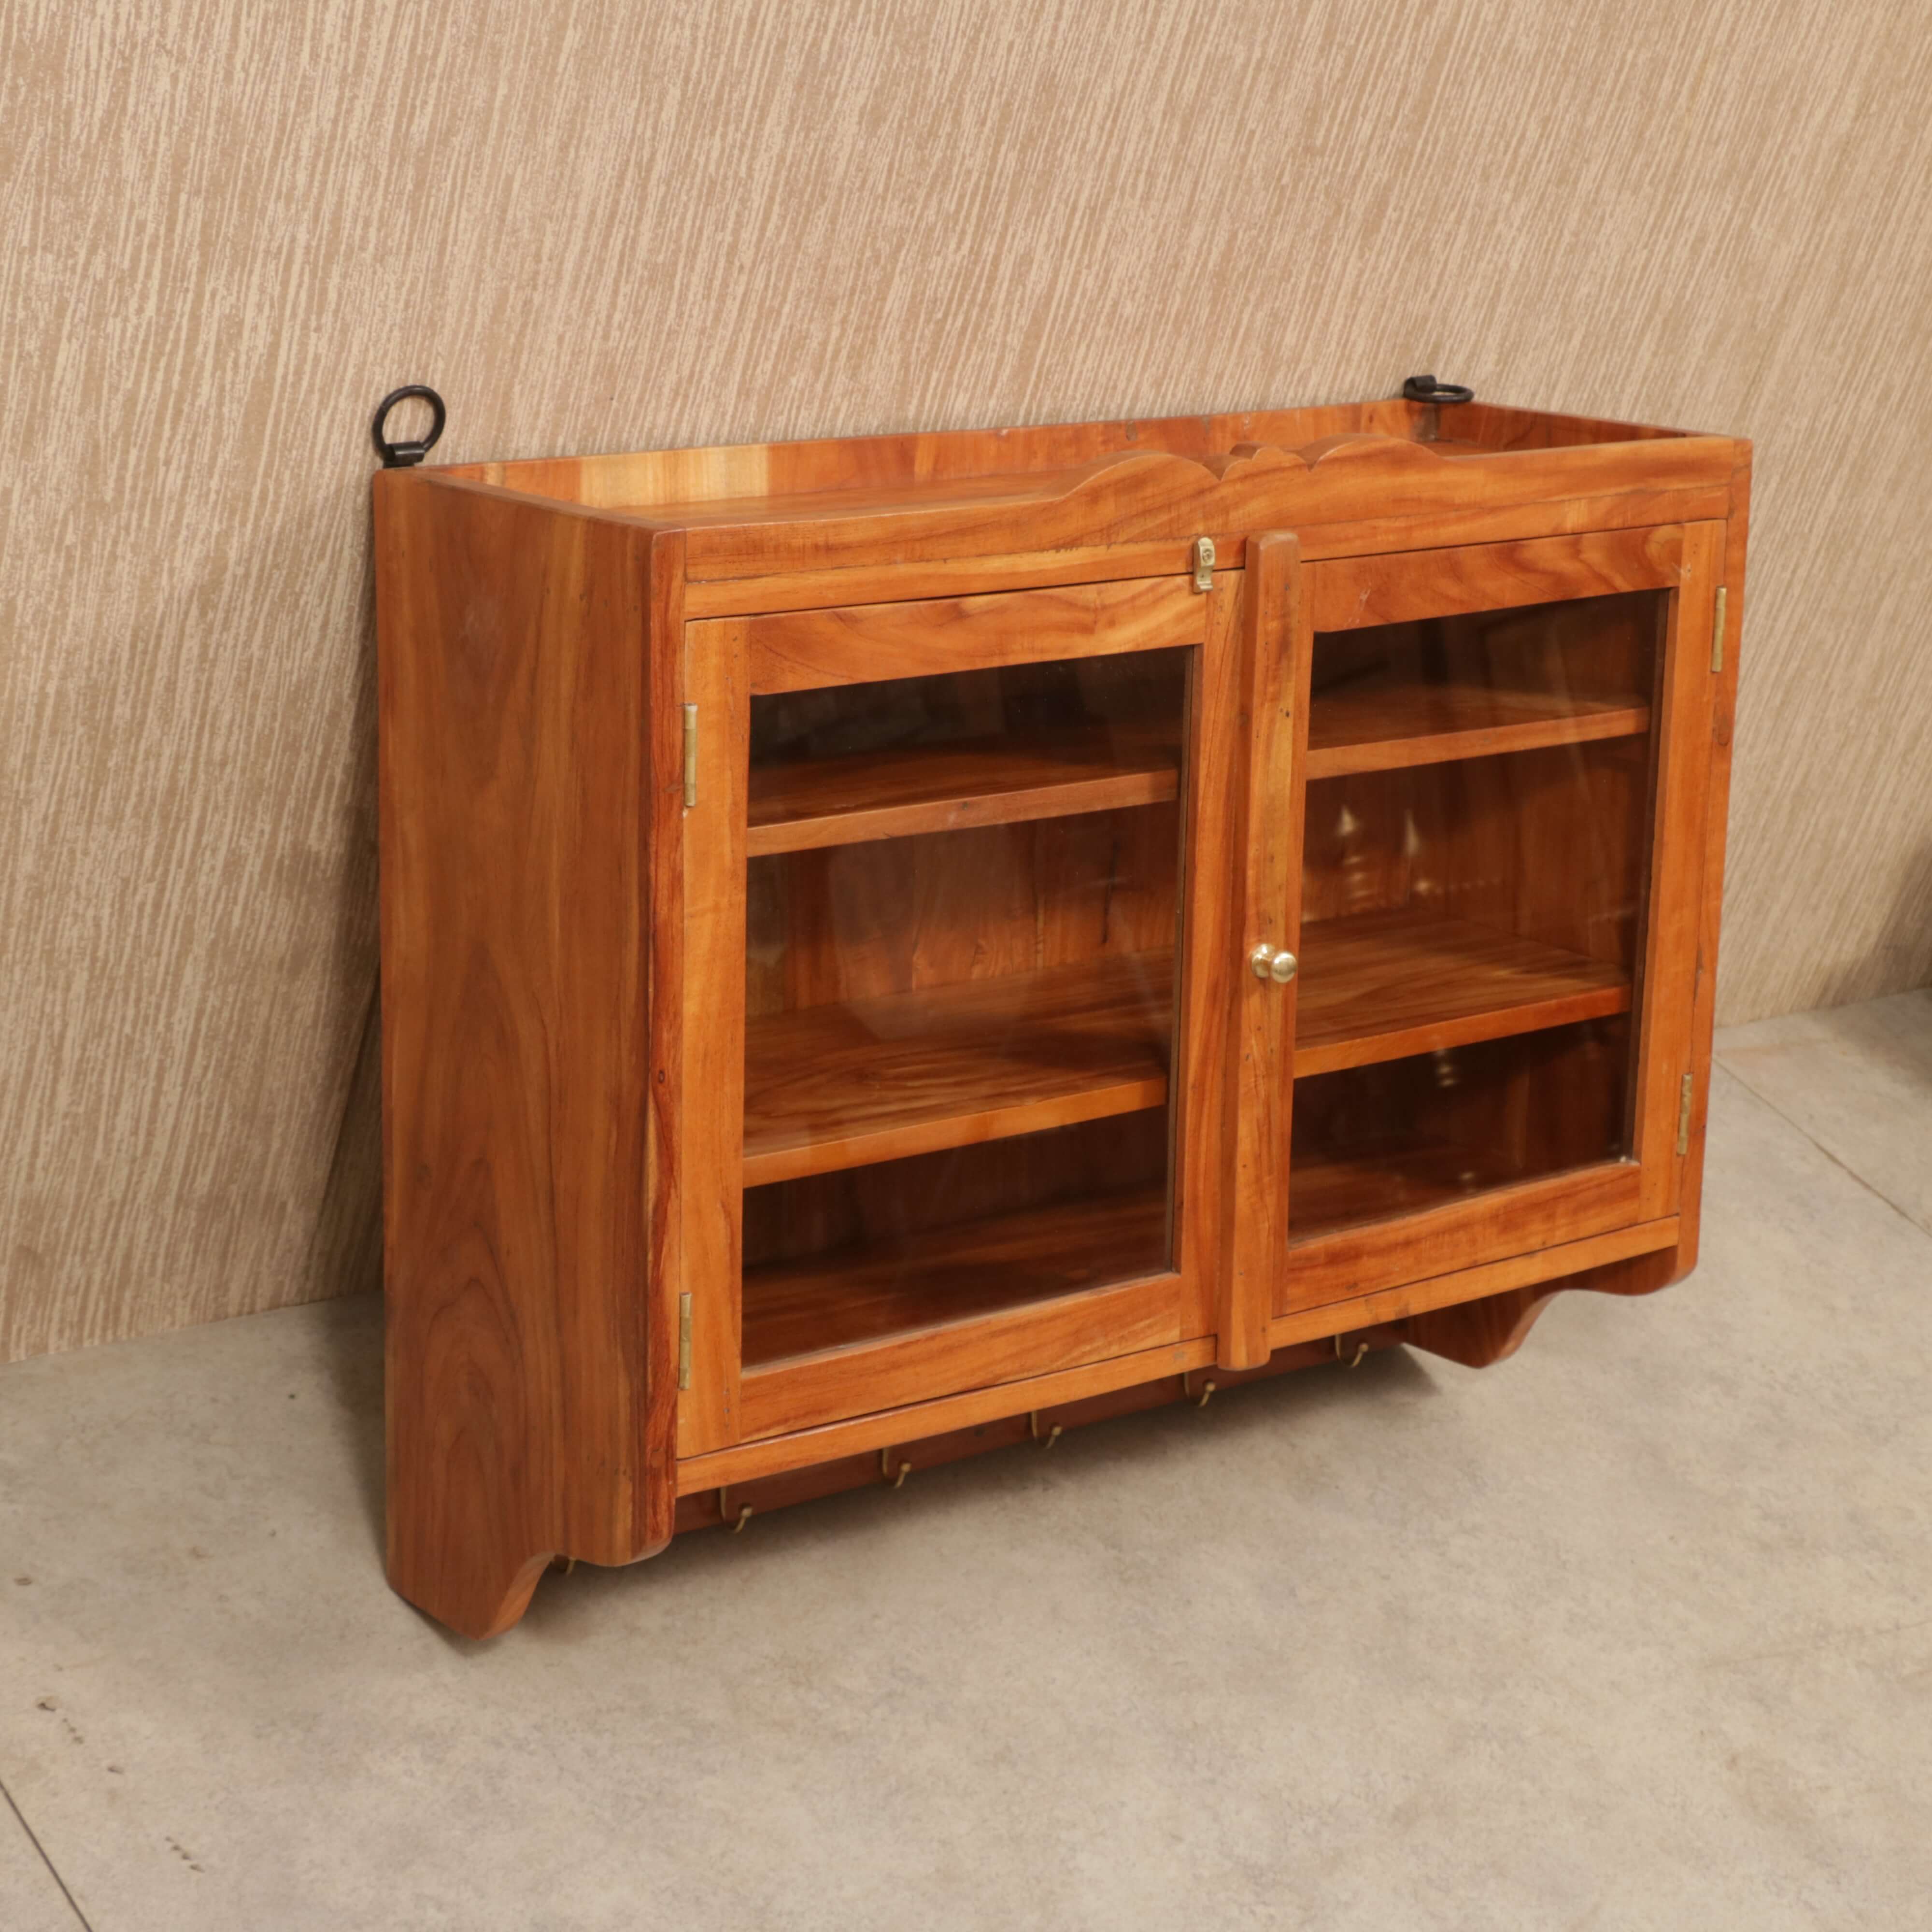 30 x 10 x 24 Inch Wide Wooden Hanging Cabinet Wall Cabinet